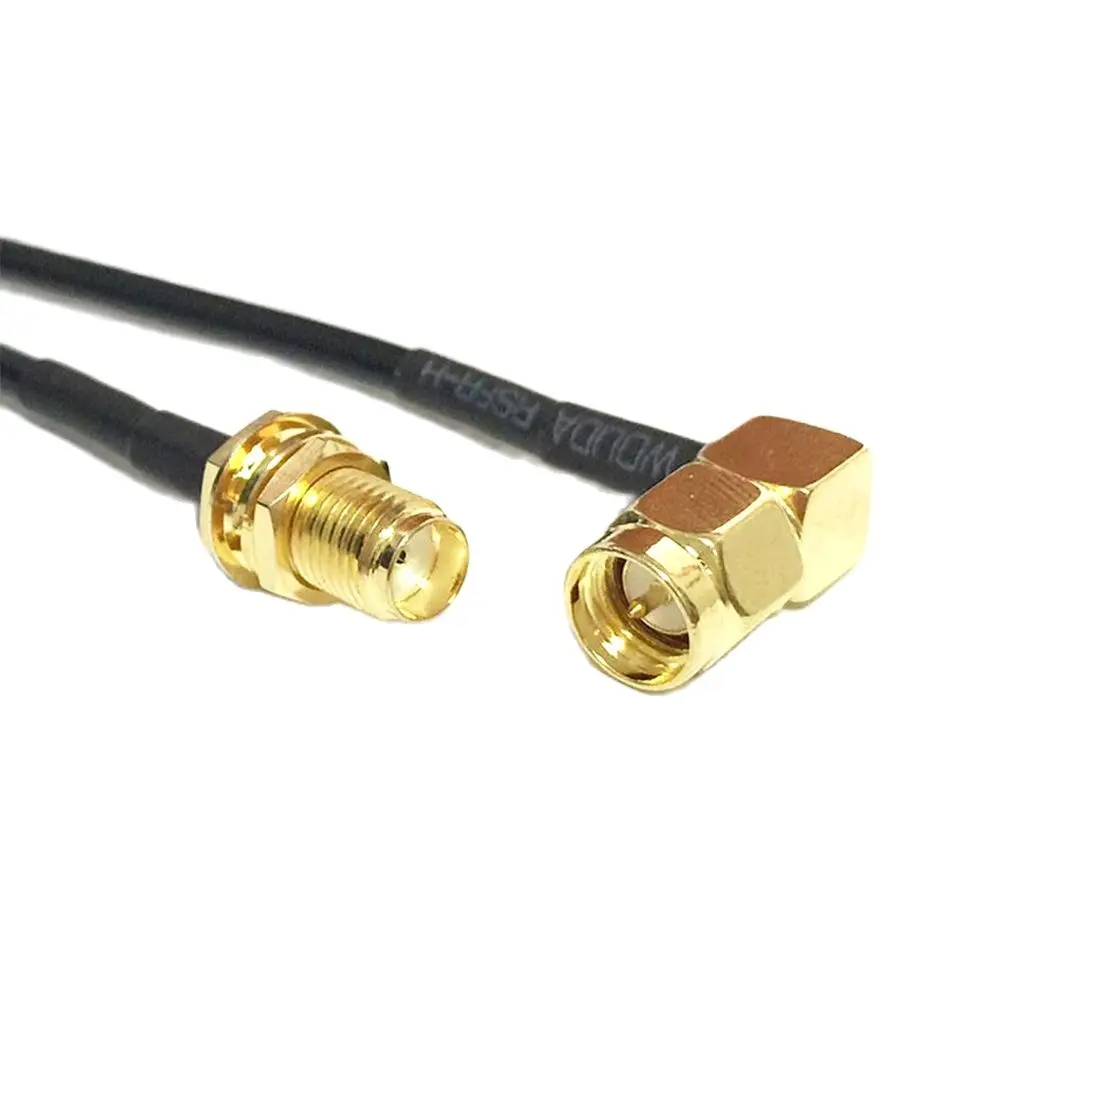 

WIFI Antenna Cable SMA Female Nut To SMA Male Right Angle Pigtail Adapter RG174 Wholesale 10cm/15cm/20cm/30cm/50cm/100cm